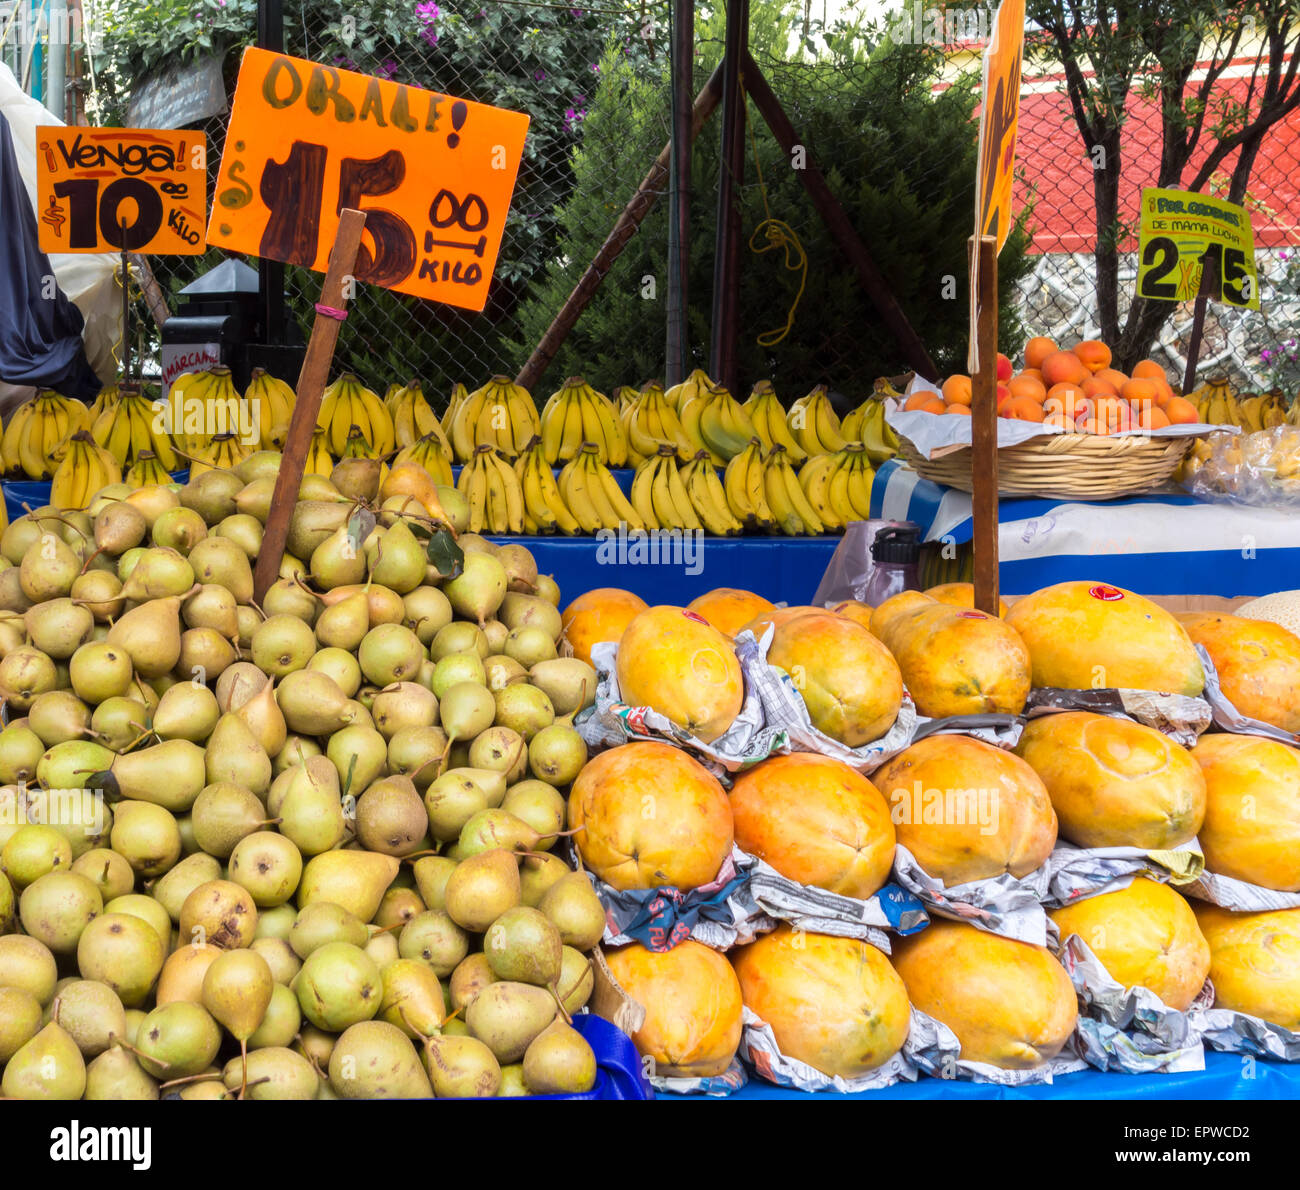 https://c8.alamy.com/comp/EPWCD2/assorted-fruits-for-sale-at-a-market-stall-mexico-city-mexico-EPWCD2.jpg